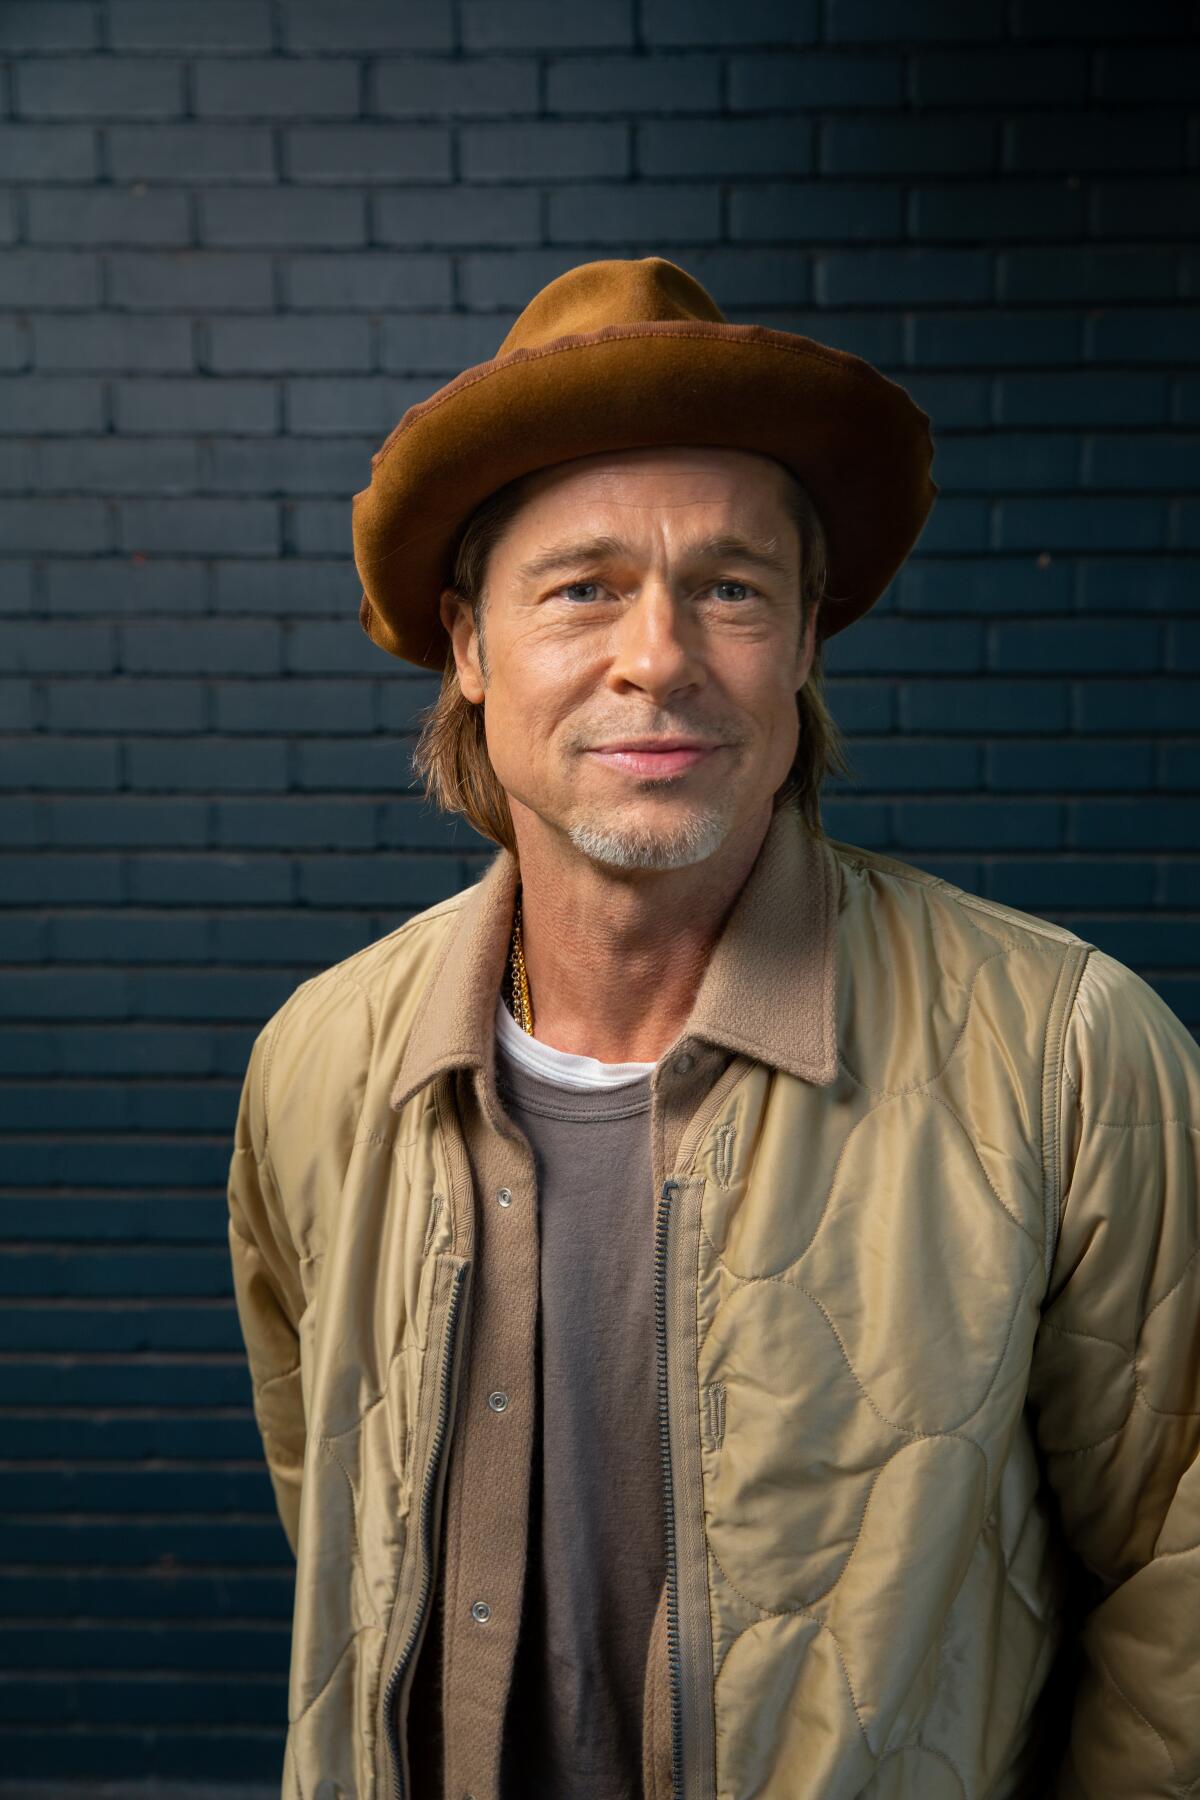 Brad Pitt, Oscar-nominated for his role in "Once Upon a Time ... in Hollywood."